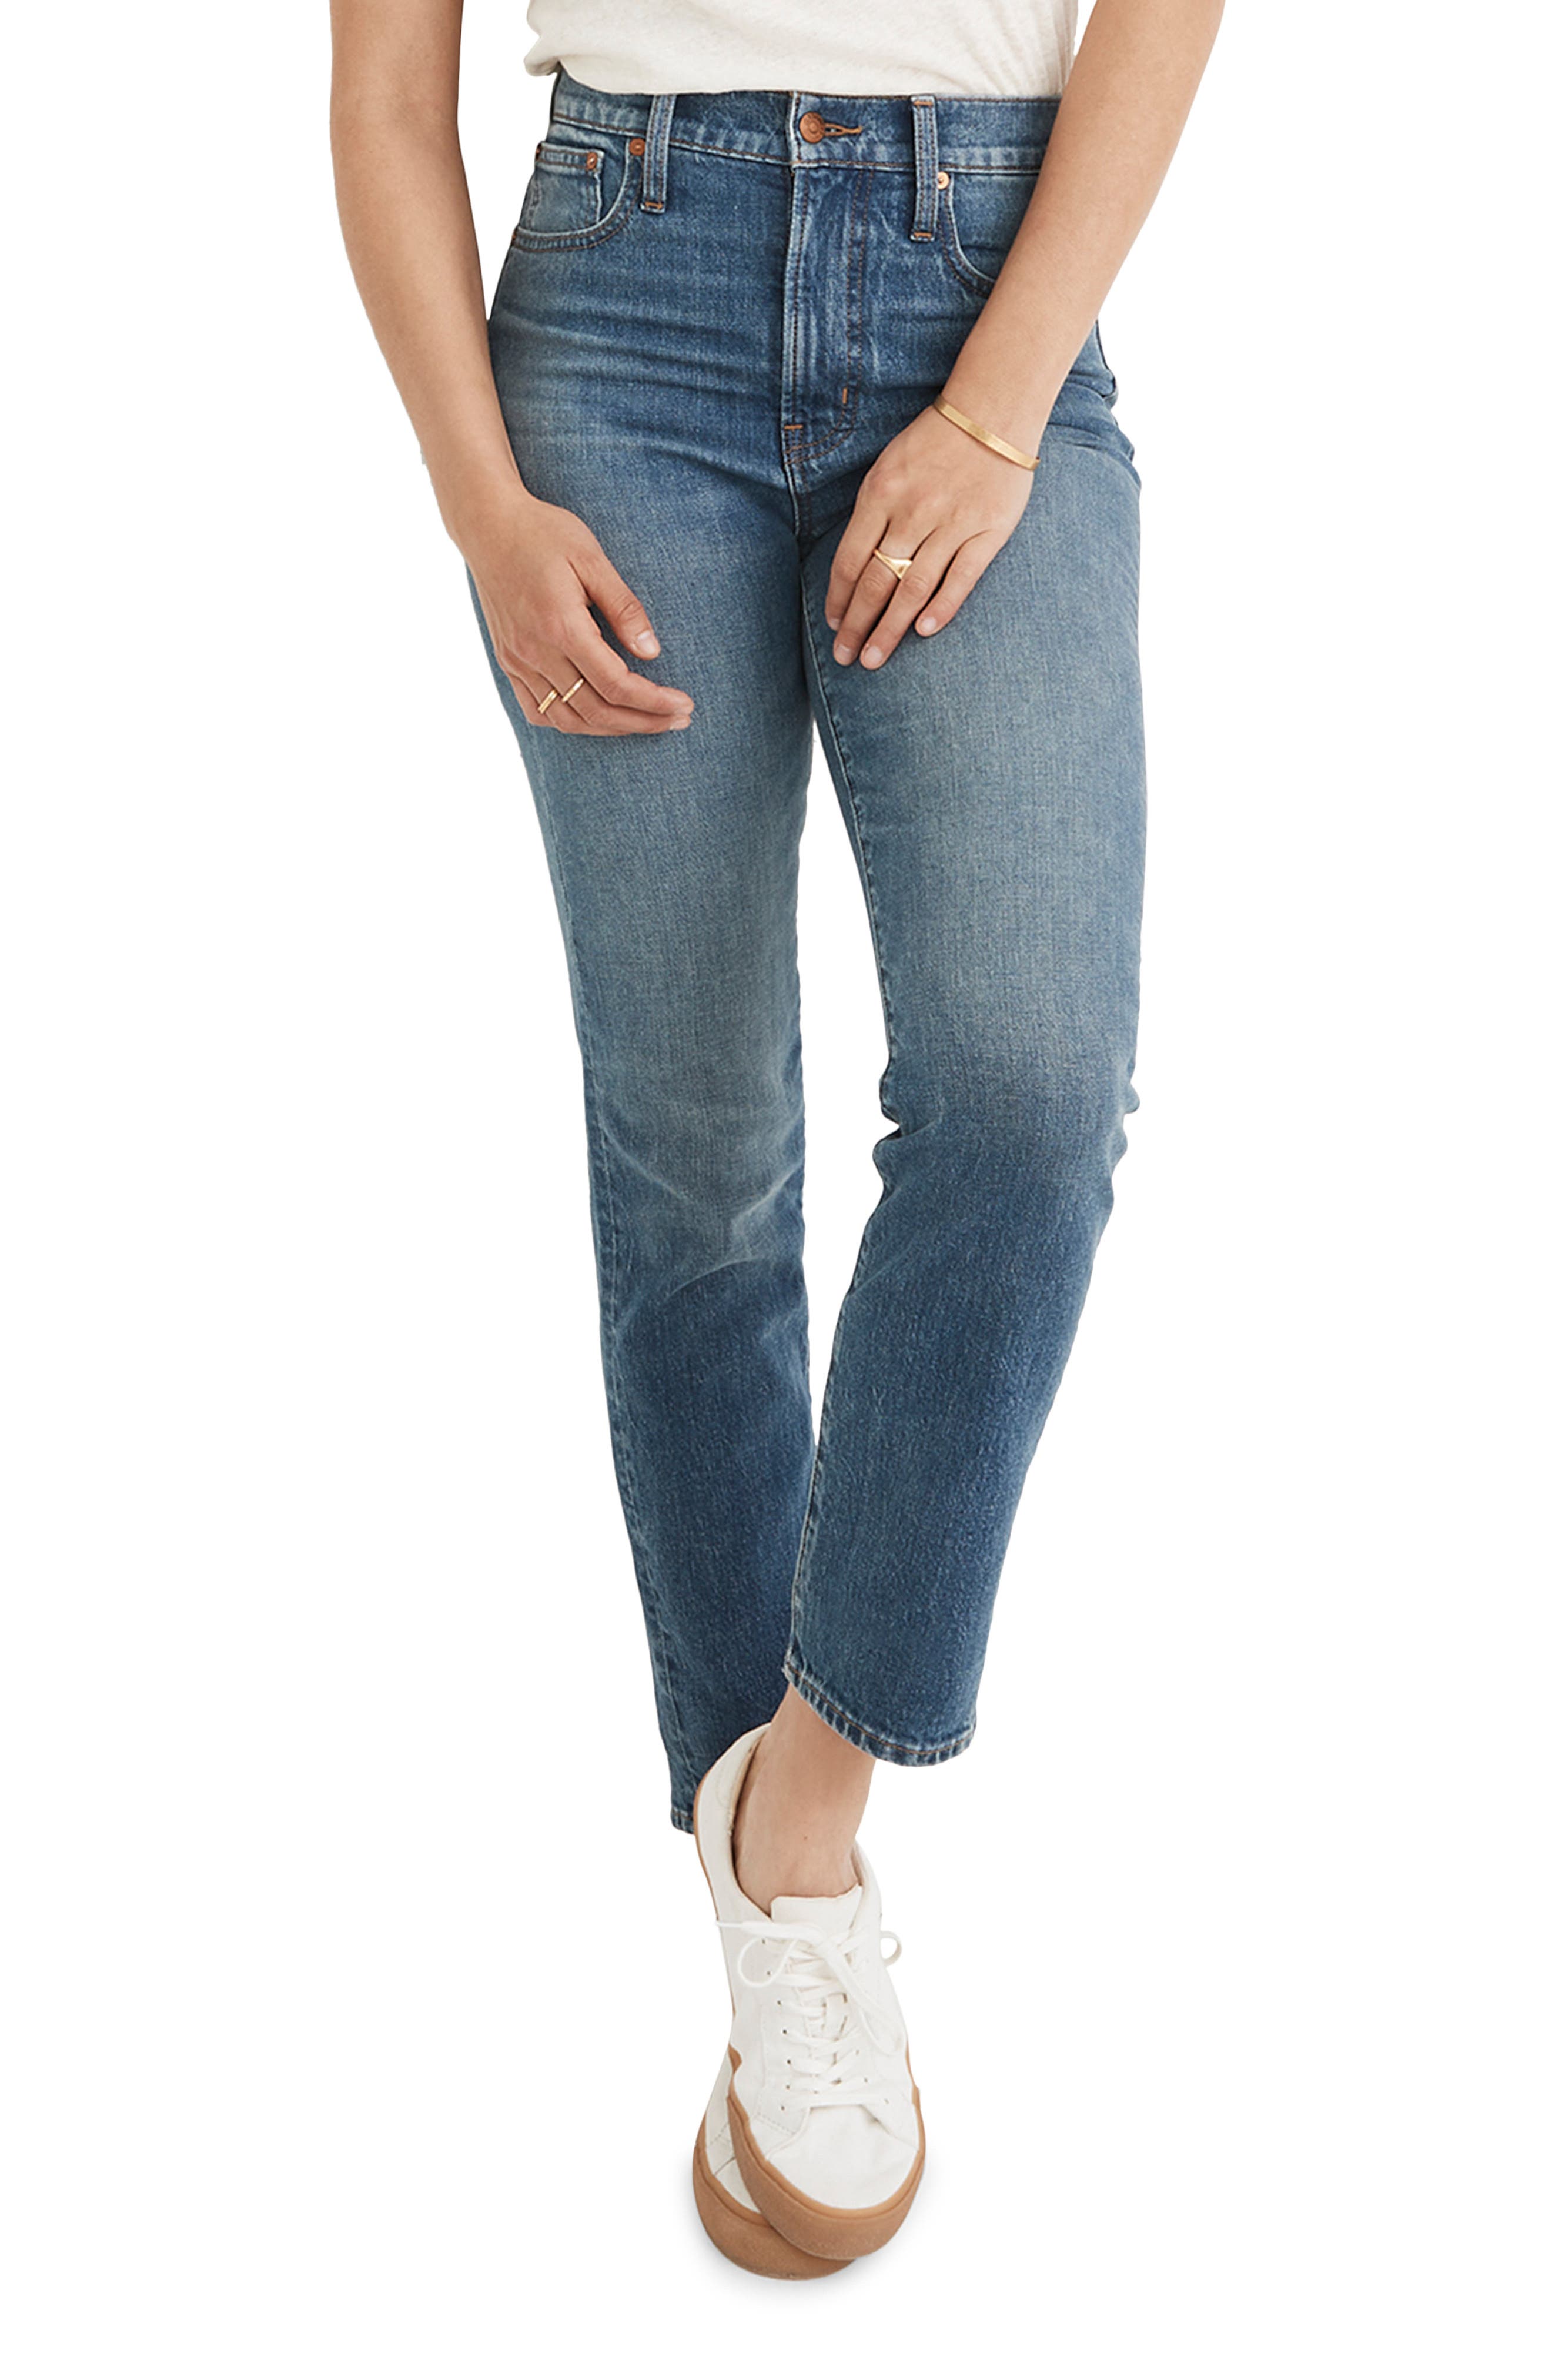 Madewell The Perfect Vintage Jeans ...